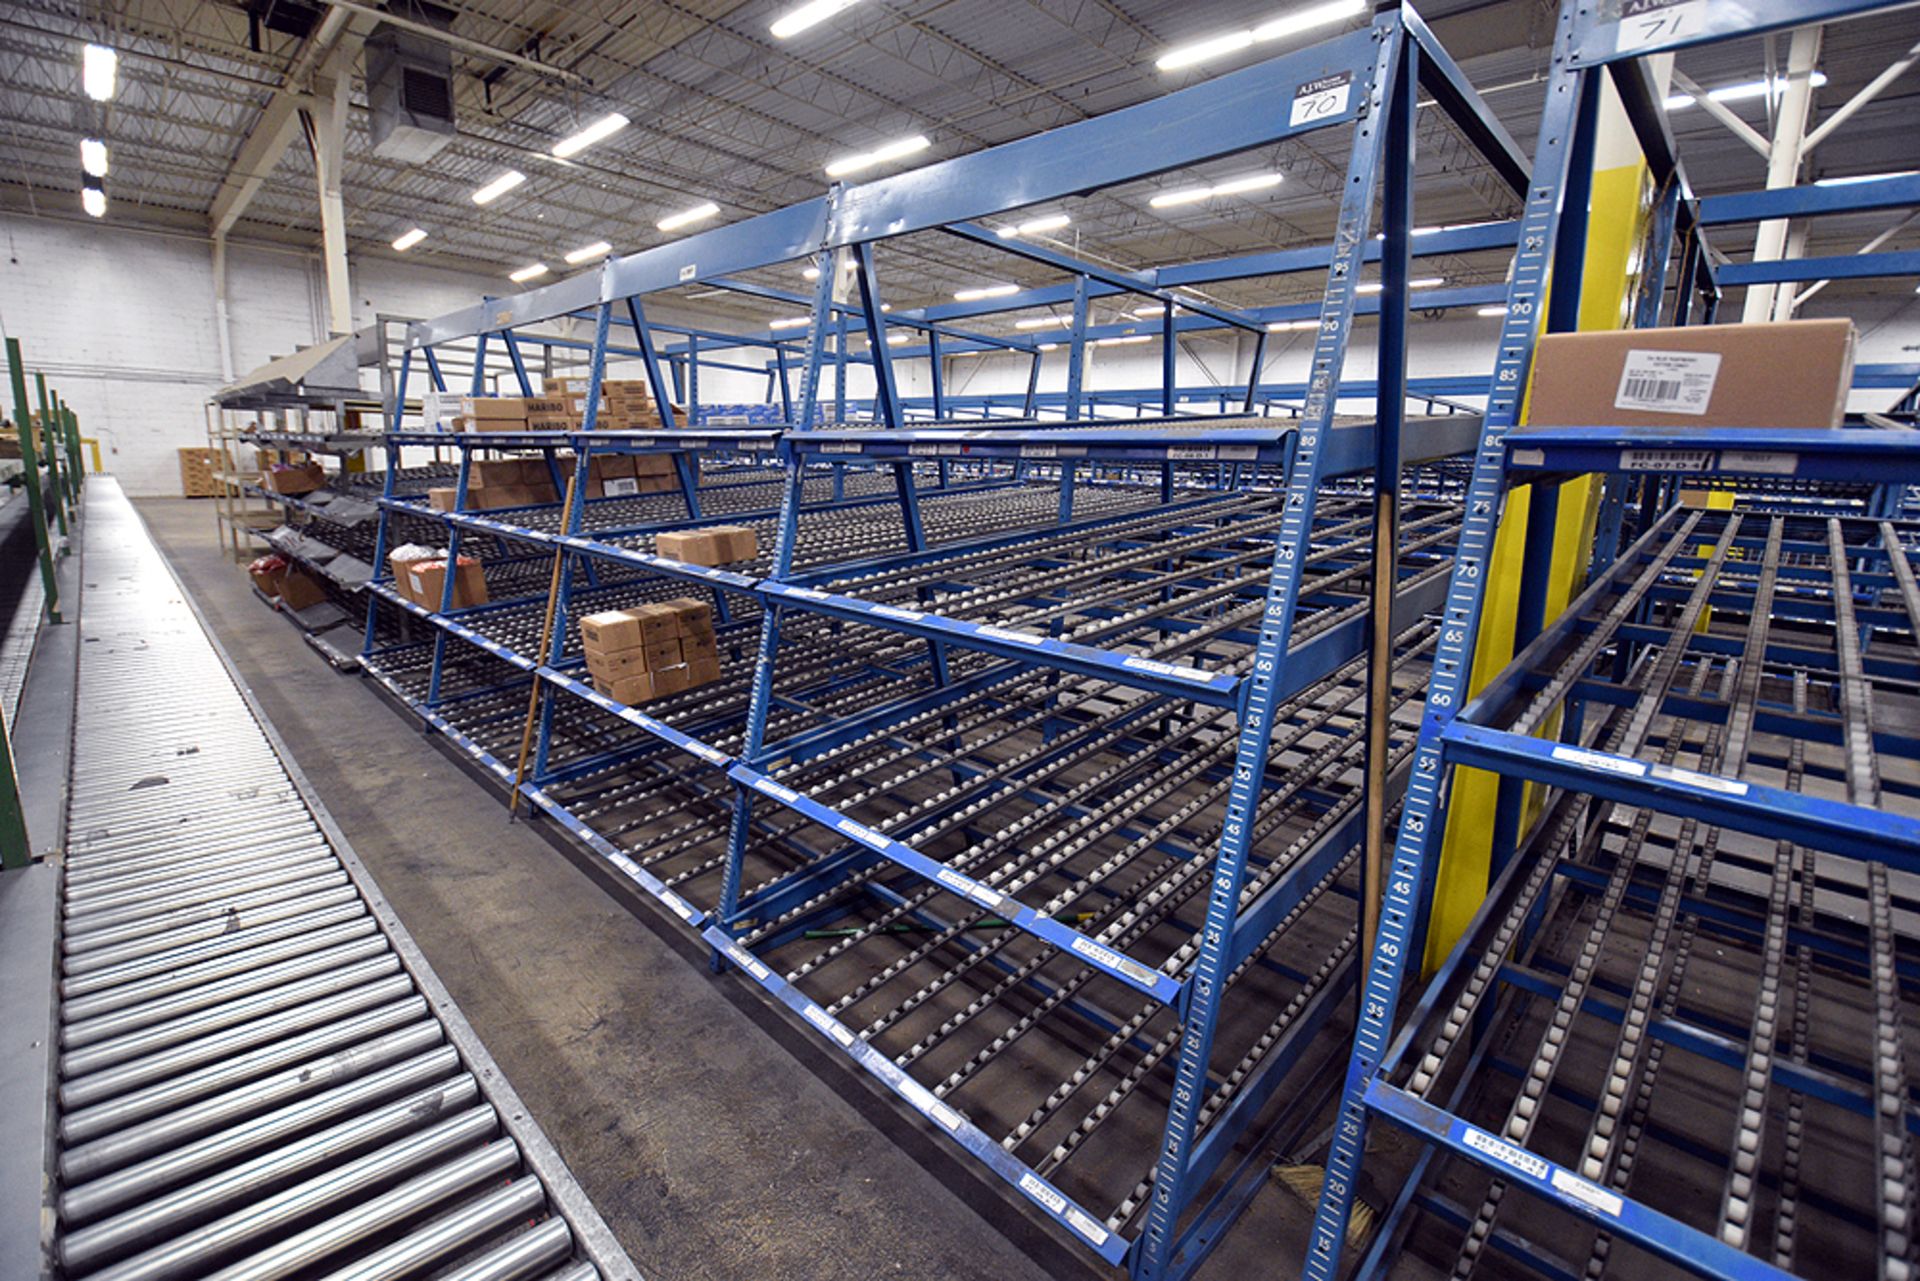 4-Tier Gravity Fed, Carton Flow Rack (124"x249"x95"H) (108"x1" Rollers) - Image 3 of 3